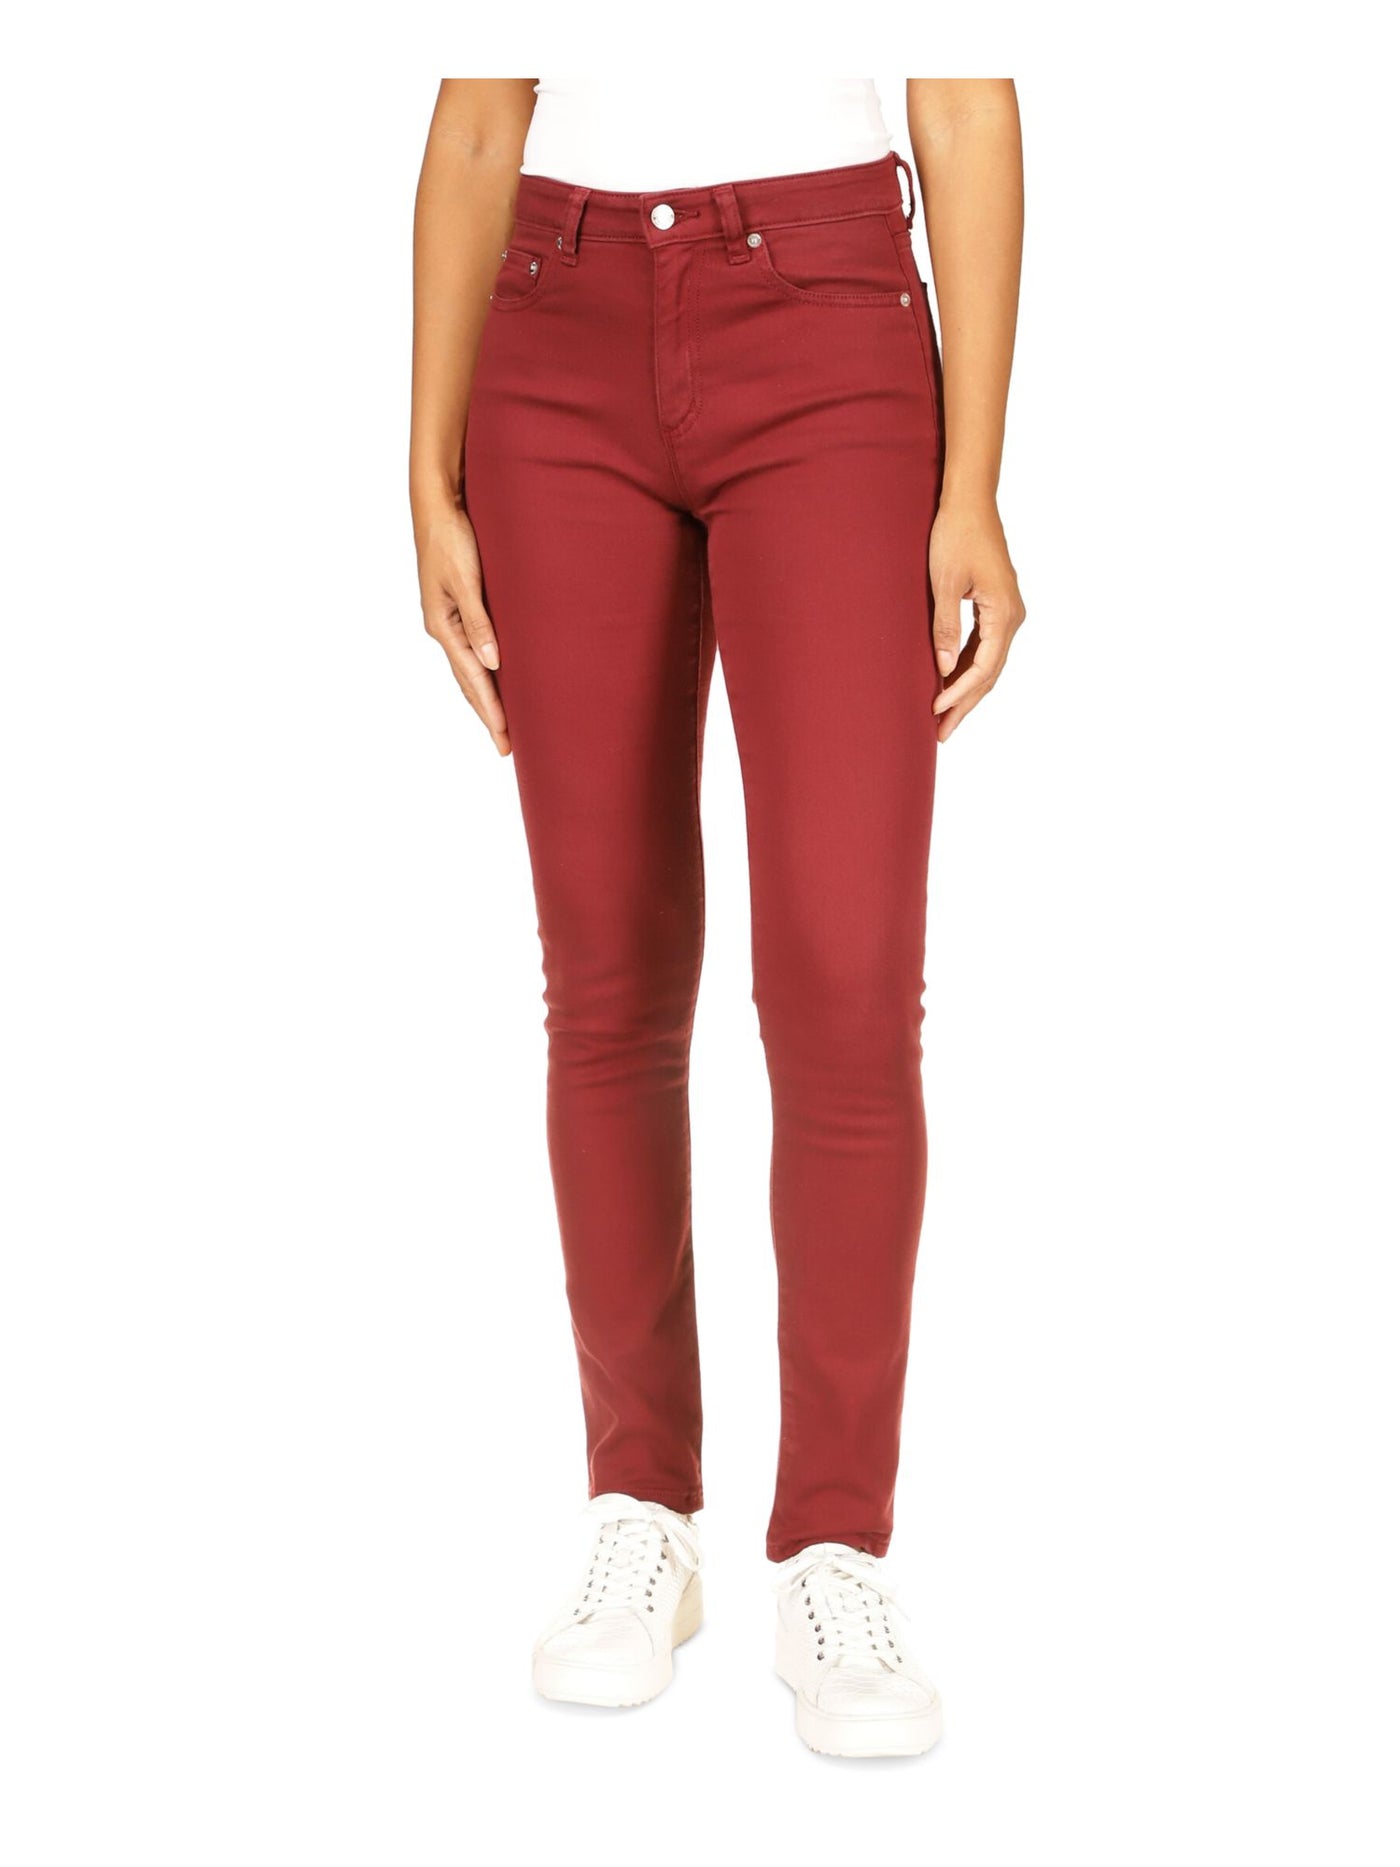 MICHAEL MICHAEL KORS Womens Red Zippered Pocketed Skinny High Waist Jeans Petites 2P